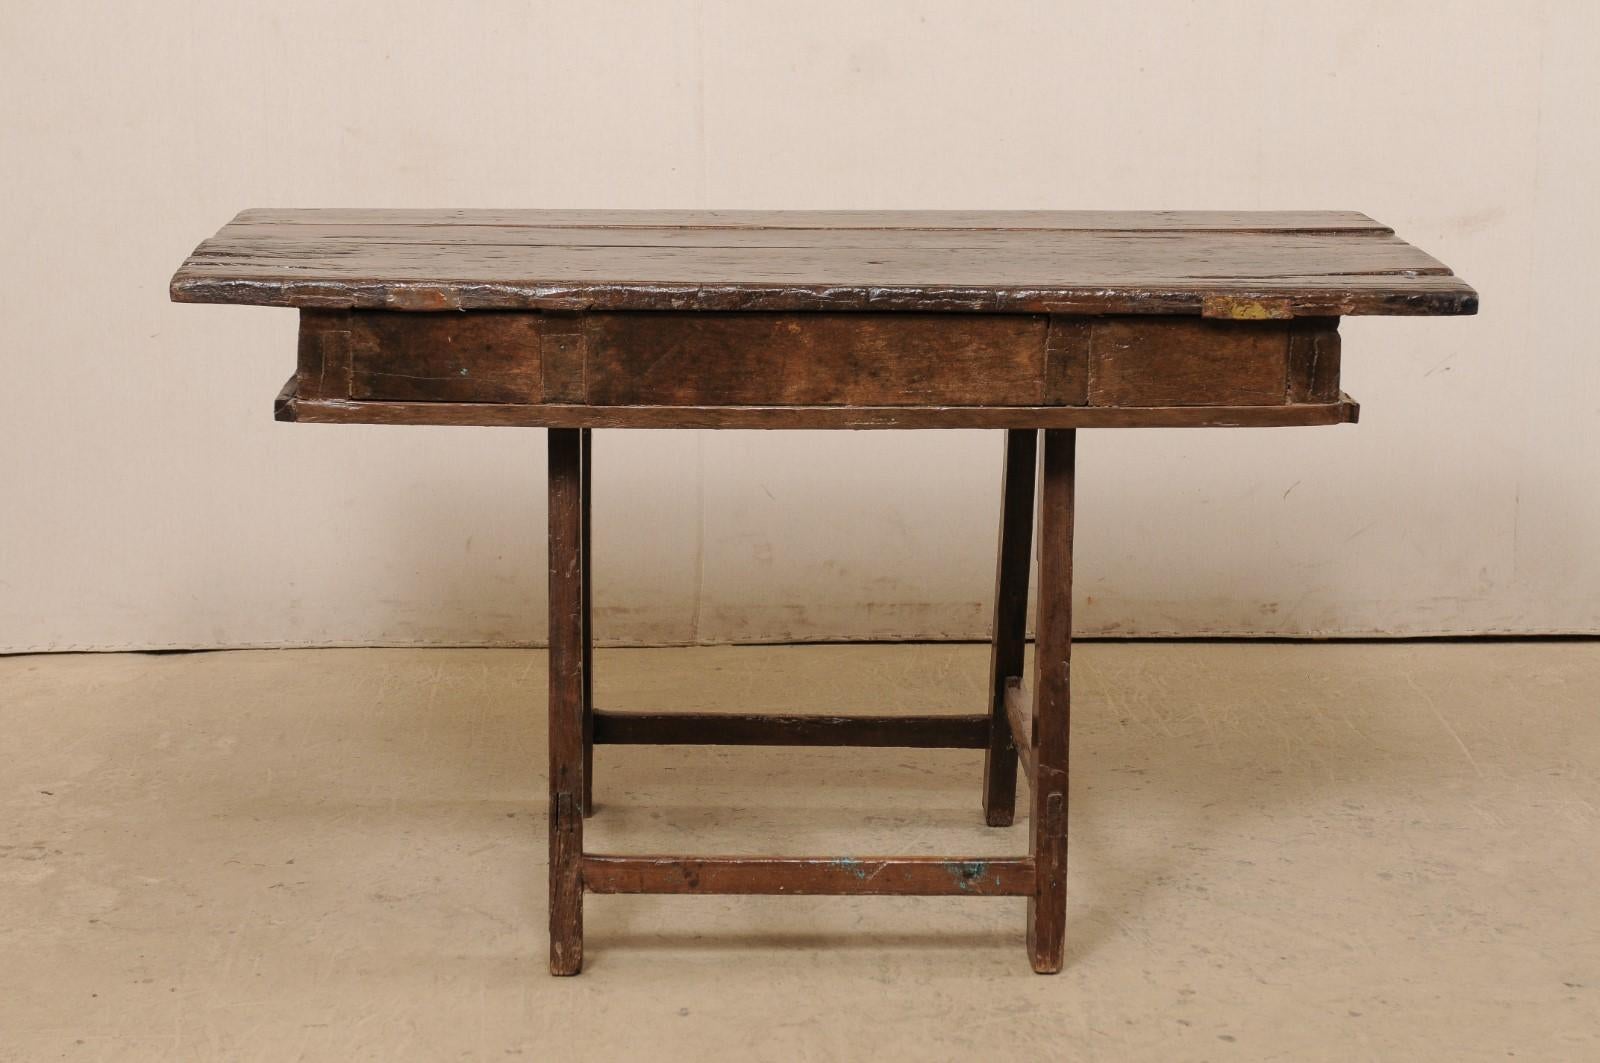 18th C. Brazilian Peroba Wood Table with Drawers, Exquisitely Rustic For Sale 3